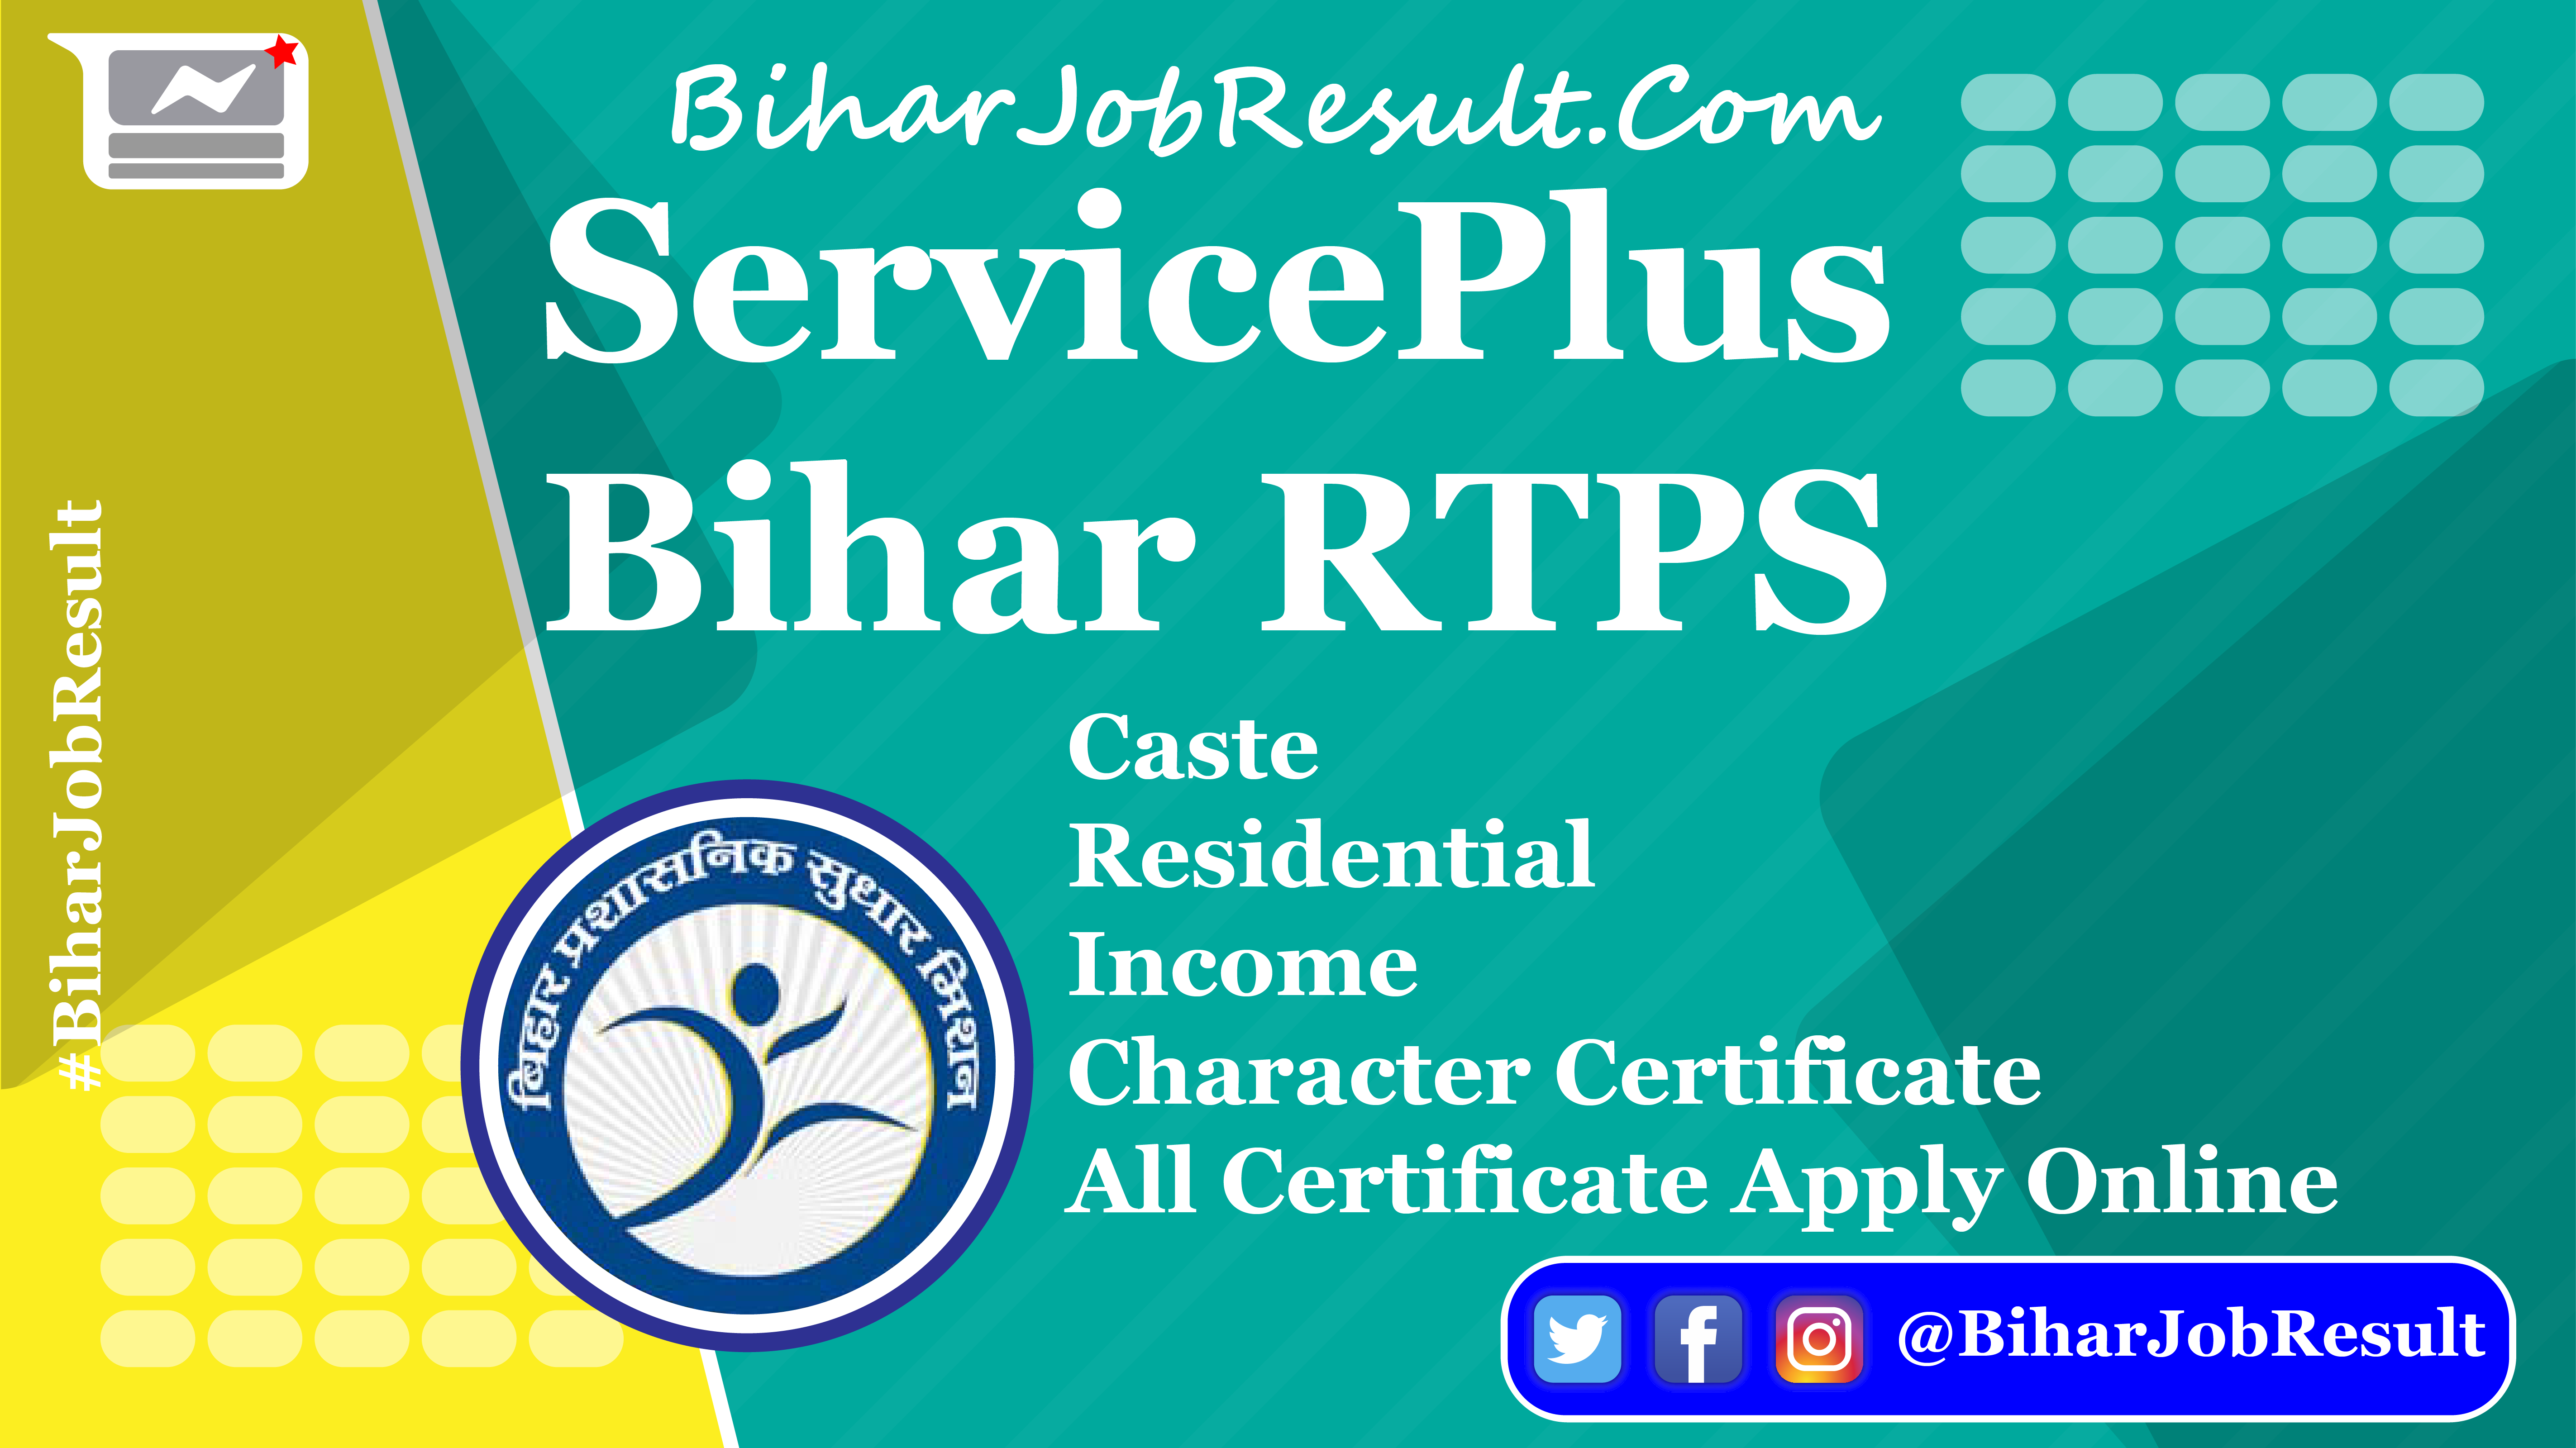 ServicePlus | Bihar RTPS – Apply for Bihar Caste, Residential, Income, Character Certificate and All New Certificate 2022.